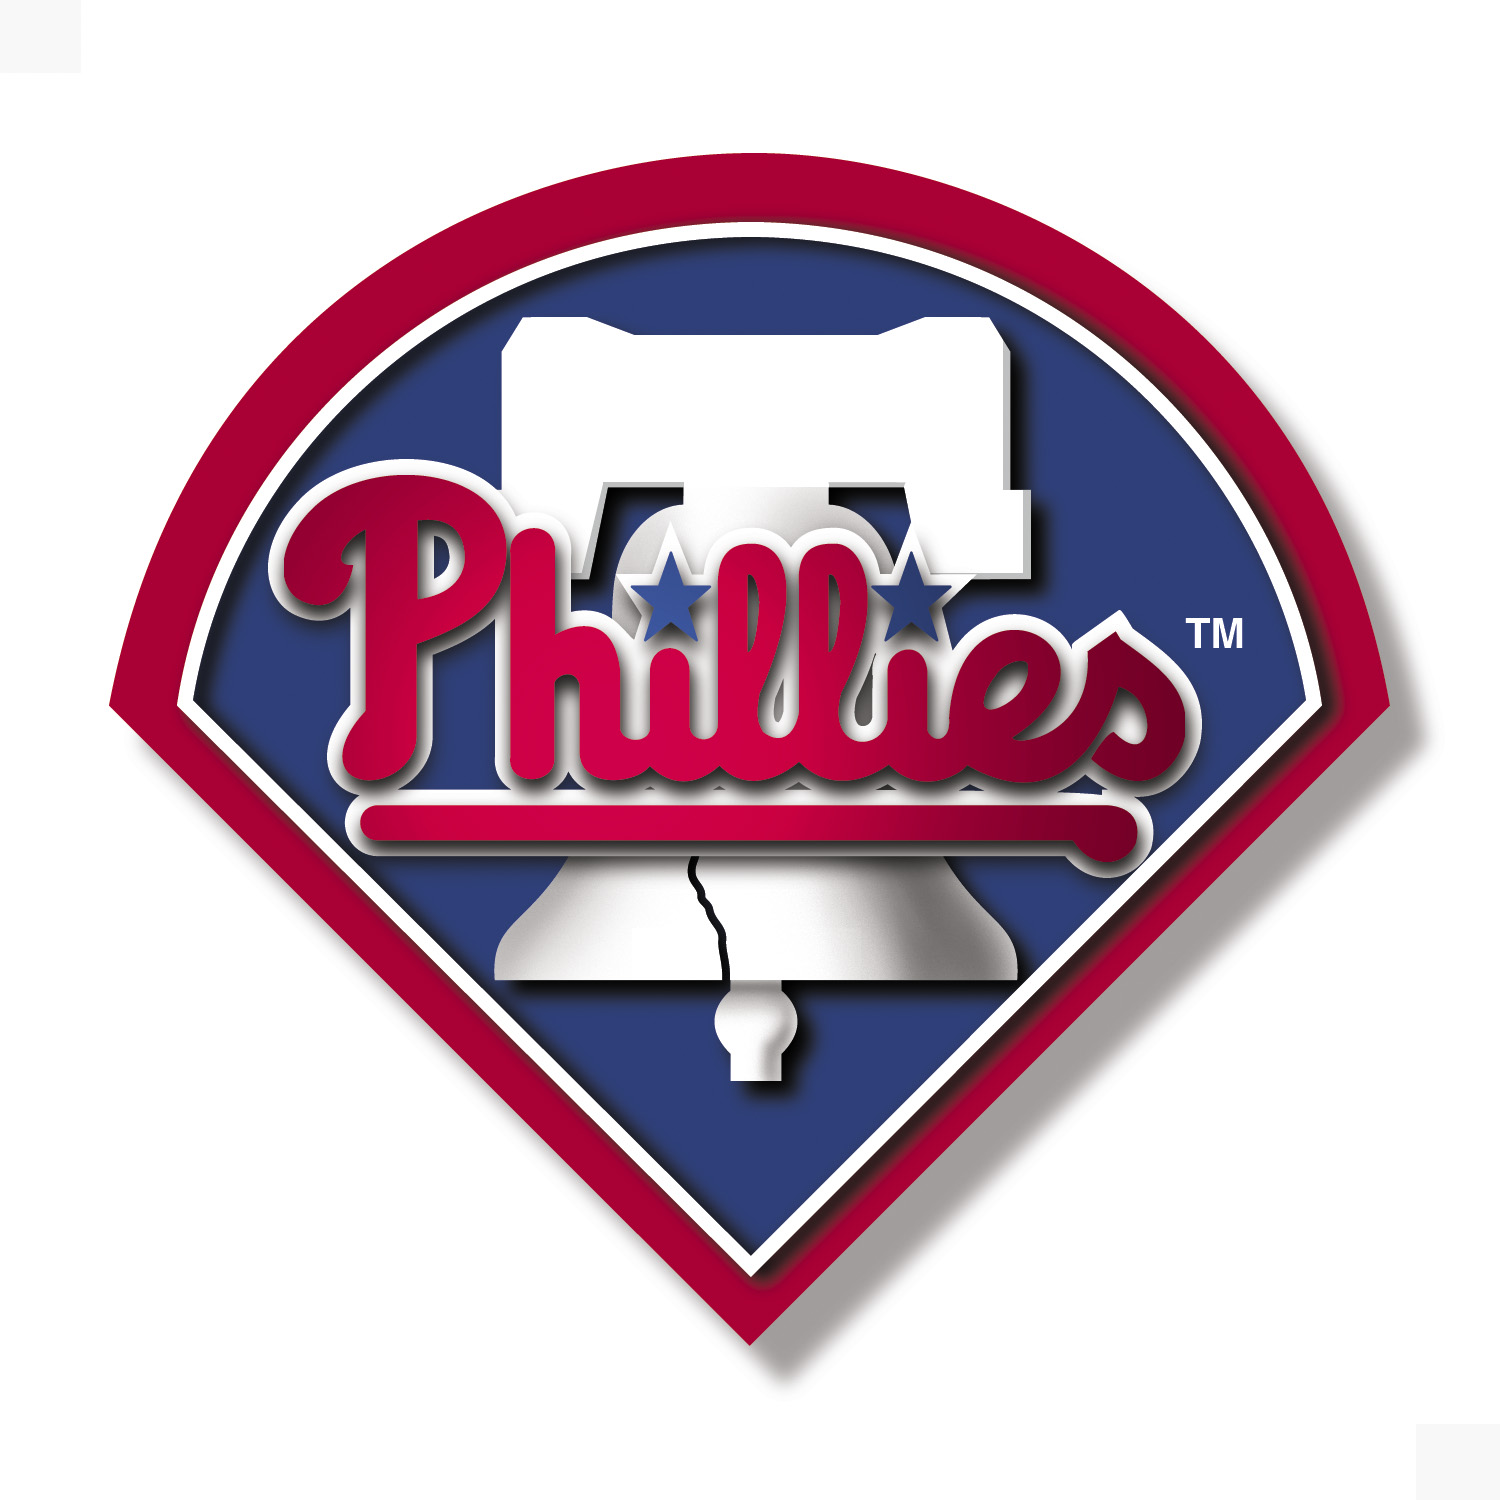 Phillies Set Win Record but End Season Early | The Tiger Times